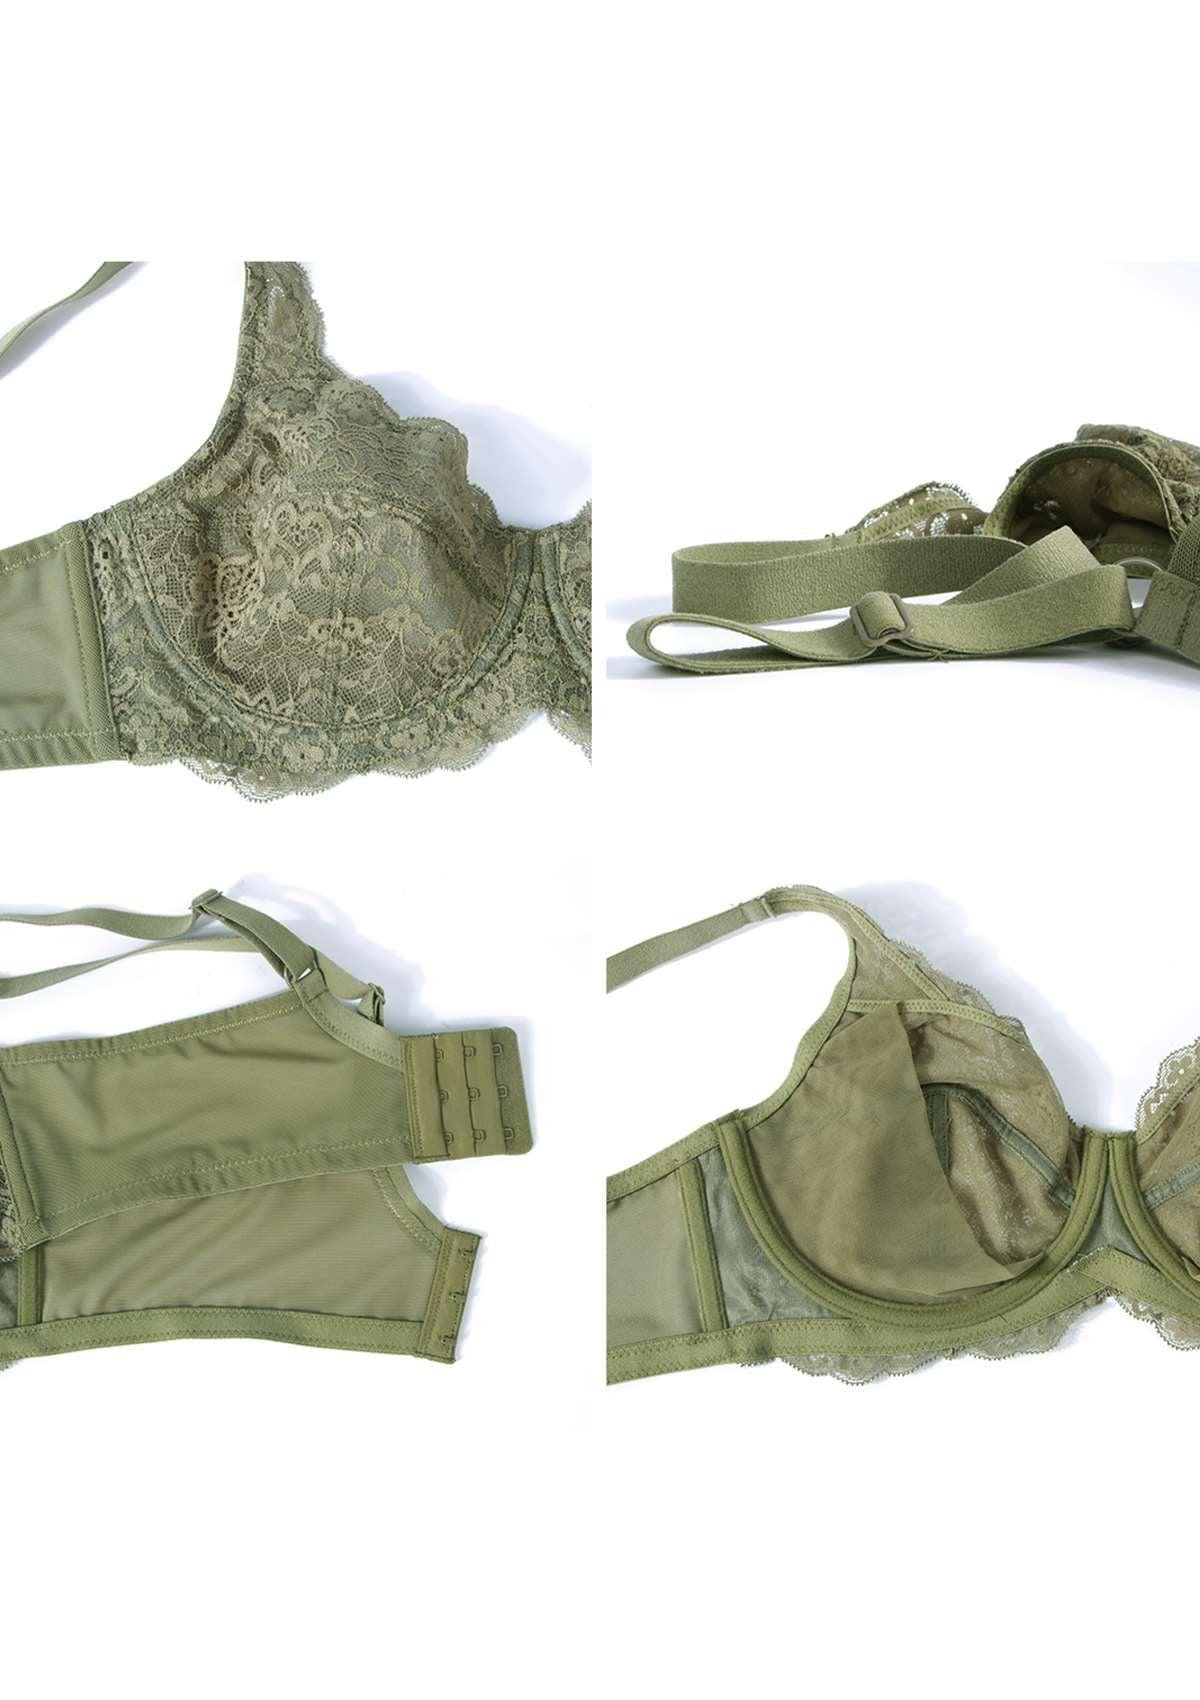 HSIA All-Over Floral Lace Unlined Bra: Minimizer Bra For Heavy Breasts - Dark Green / 36 / D